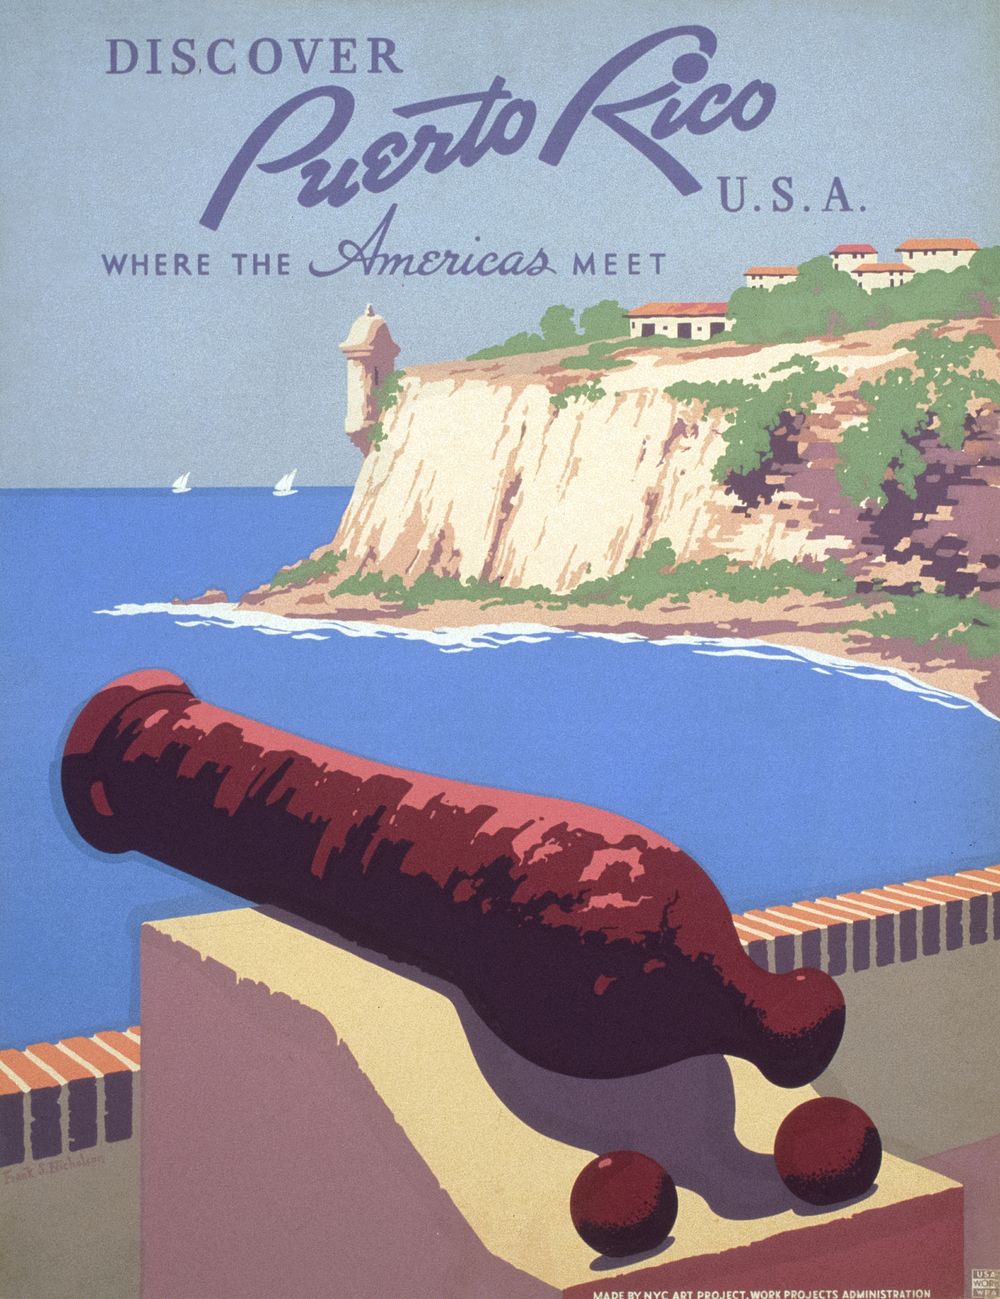 Discover Puerto Rico U.S.A. Where the Americas meet (1936) poster by Frank S. Nicholson. Original public domain image from…